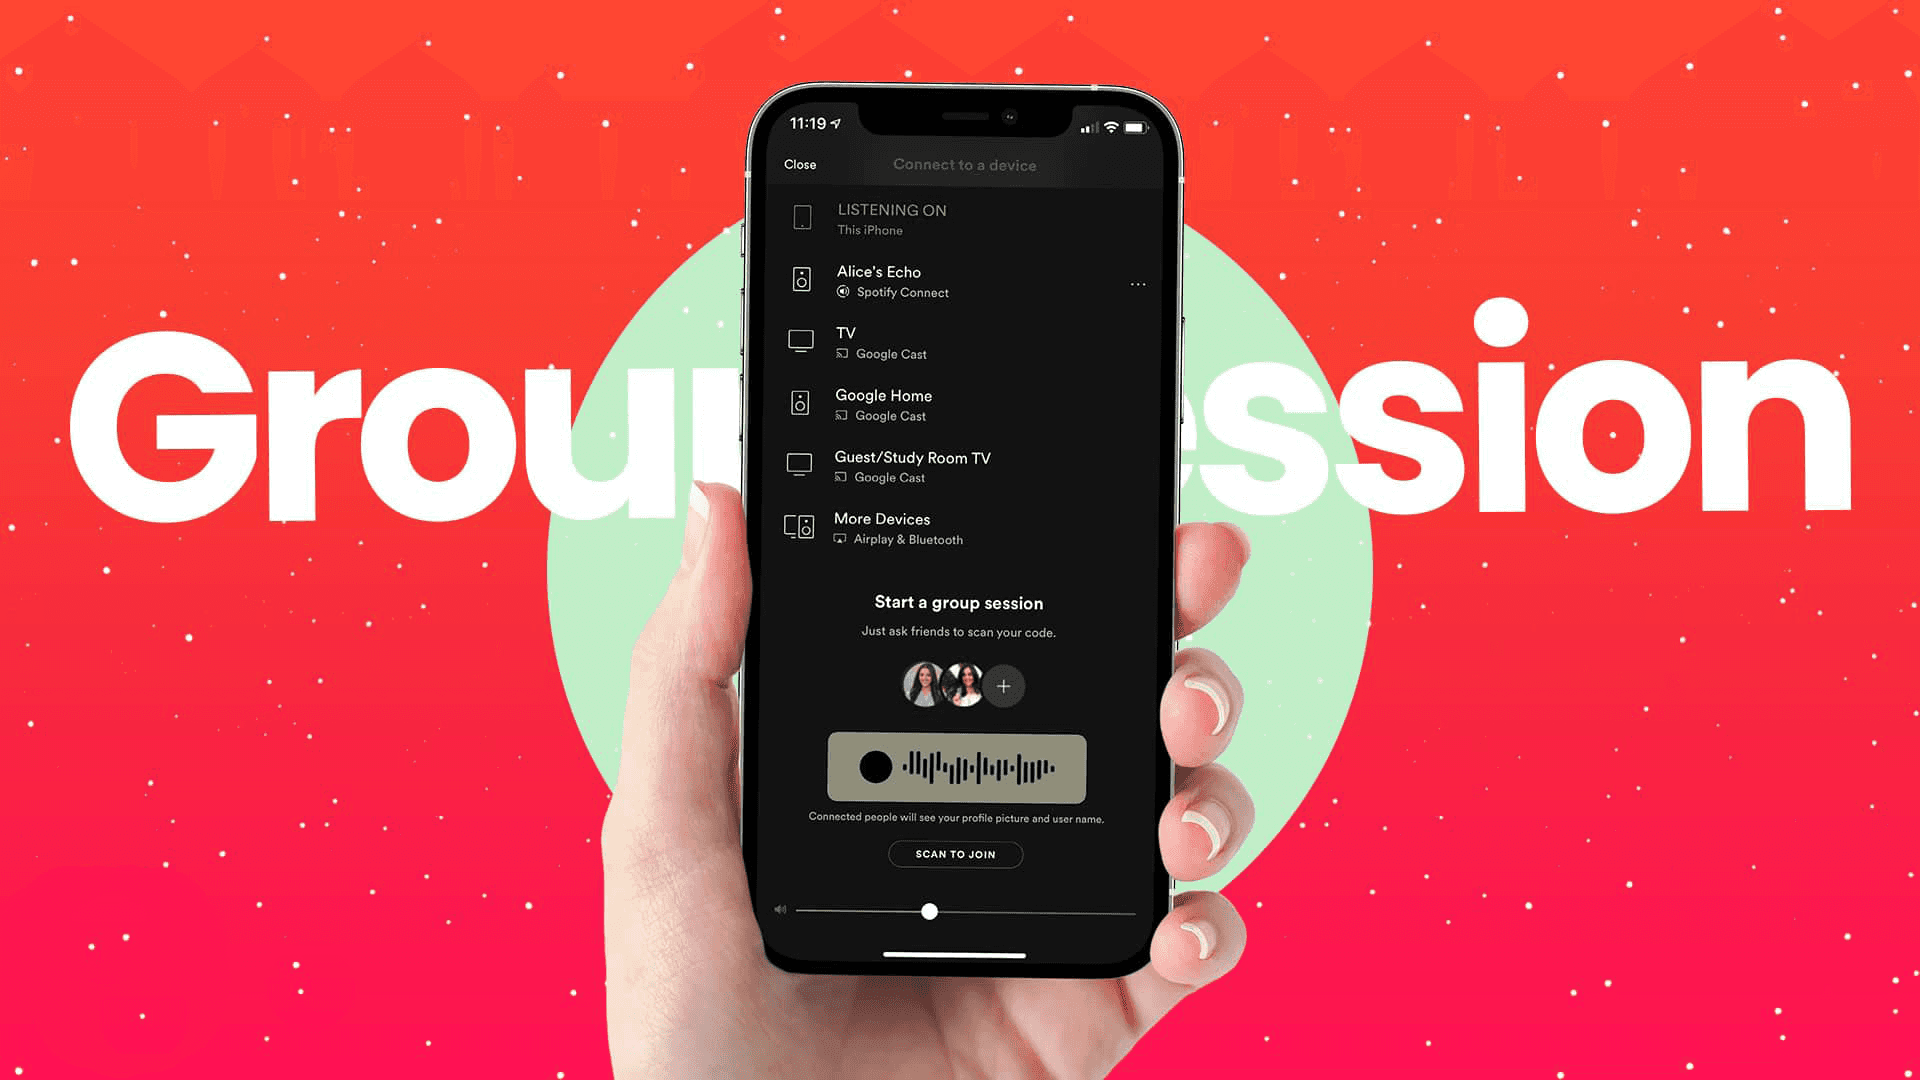 Spotify Group Session lets you play songs and playlists together on your PC or any other device. Select a playlist and get started. 